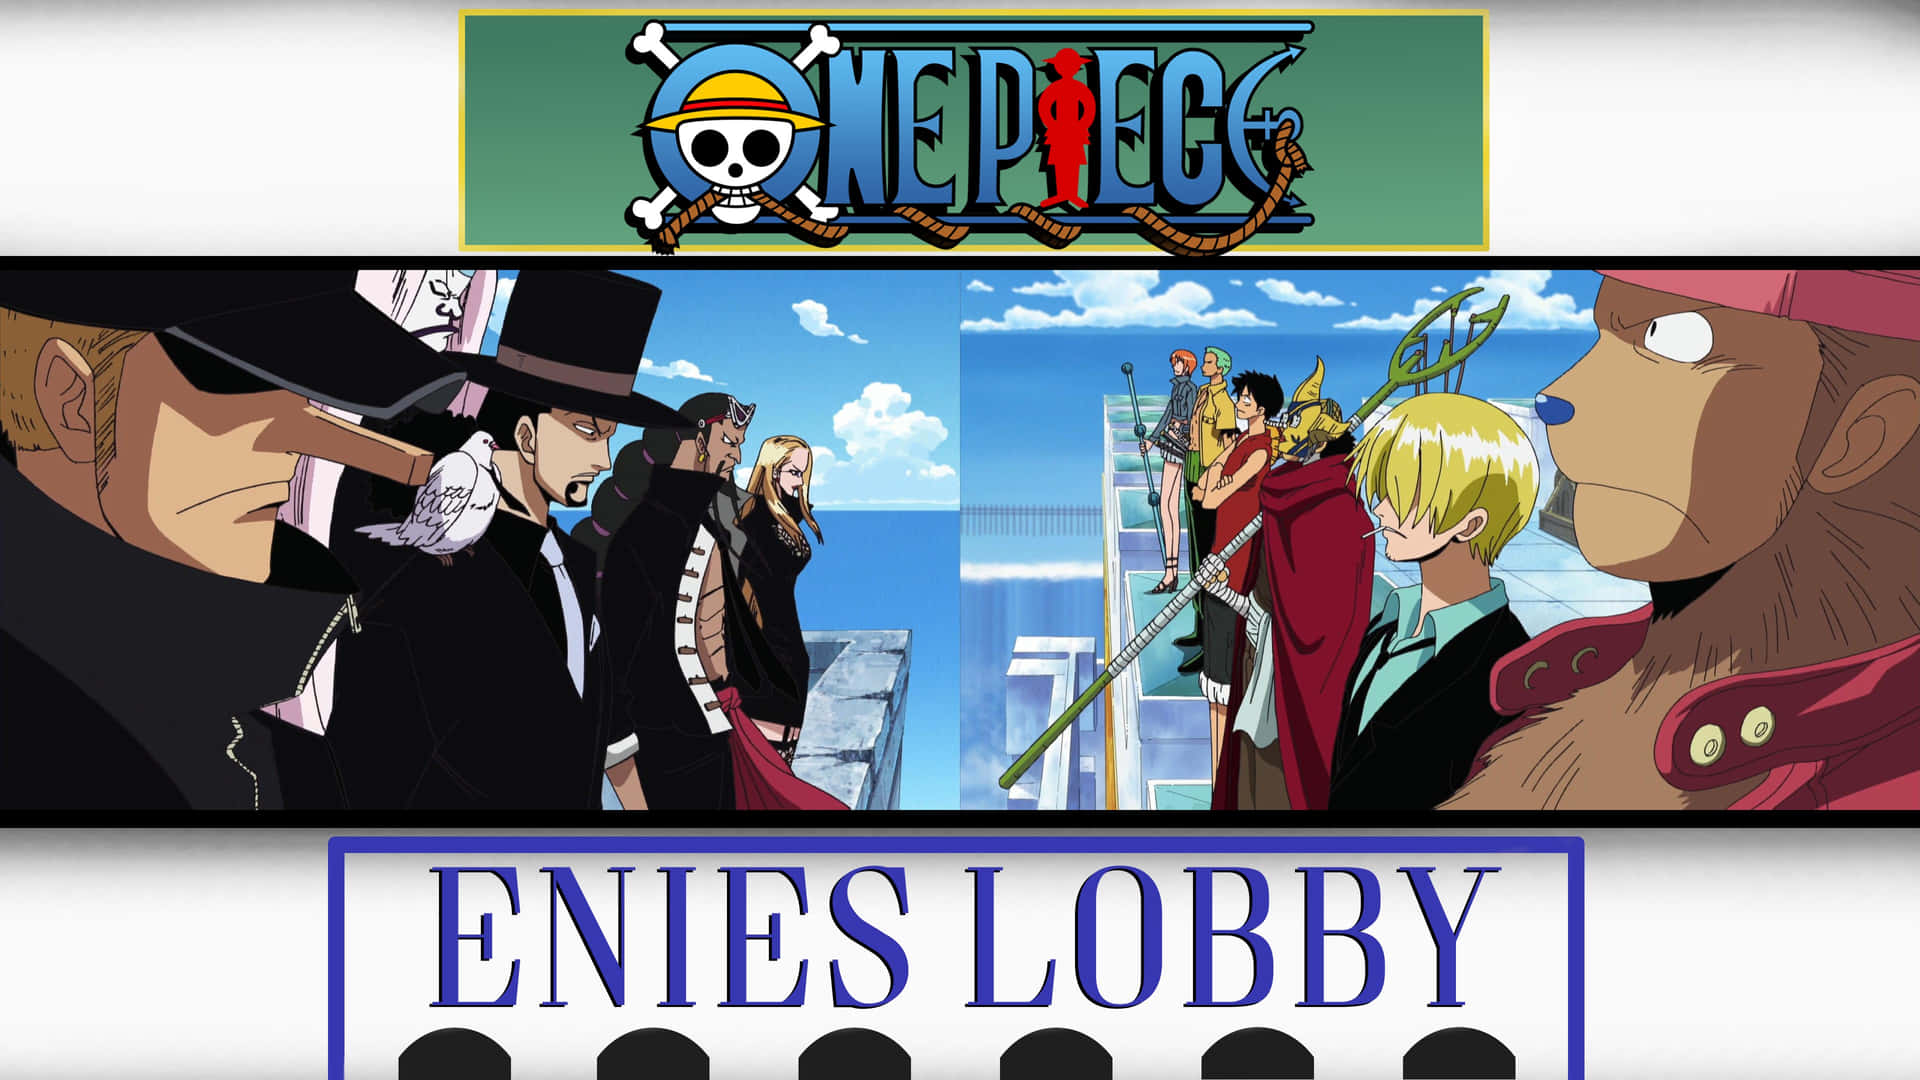 Enies Lobby, the iconic maritime fort of the world-renowned Straw Hat Pirates Wallpaper